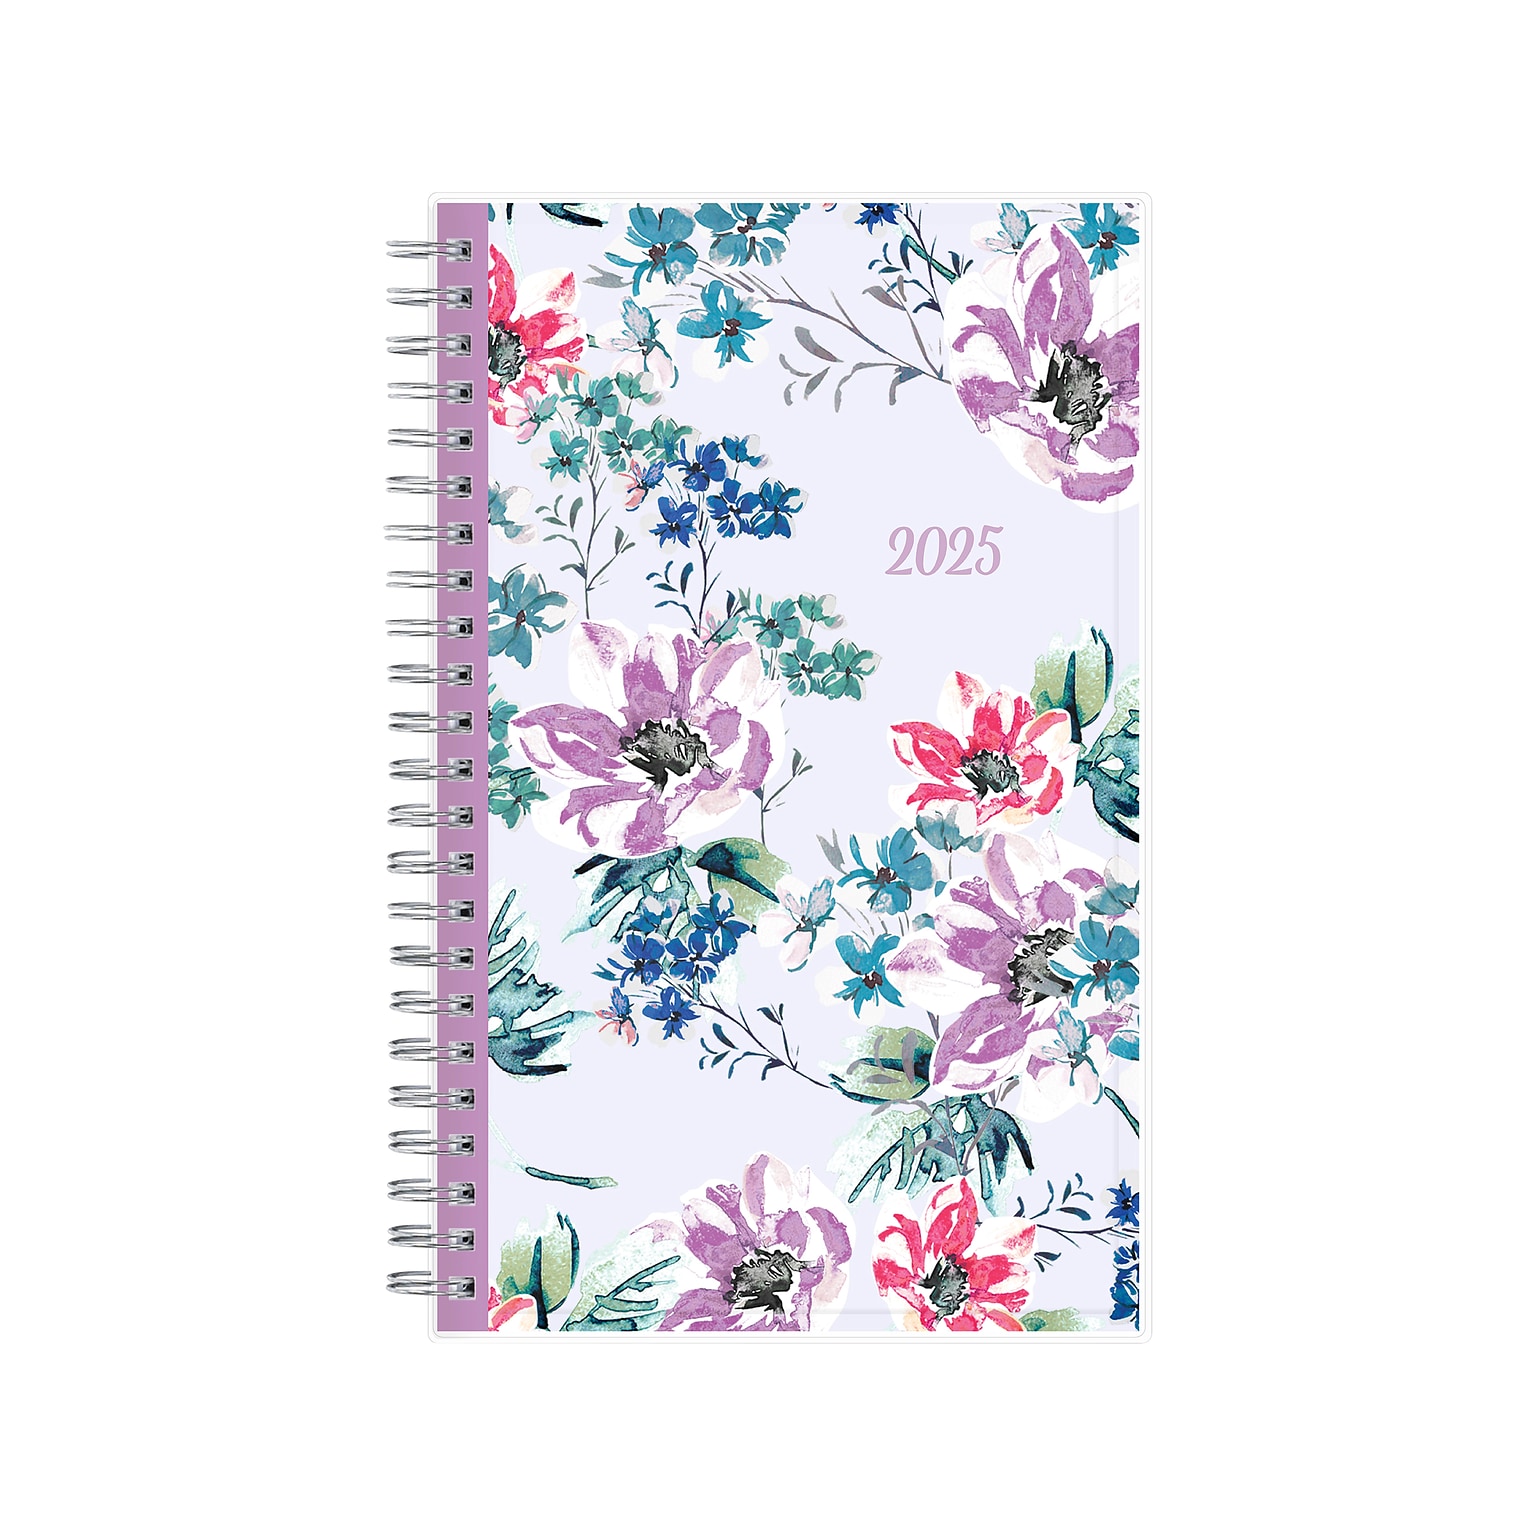 2025 Blue Sky Laila 5 x 8 Weekly & Monthly Planner, Plastic Cover, Multicolor (137276-25)